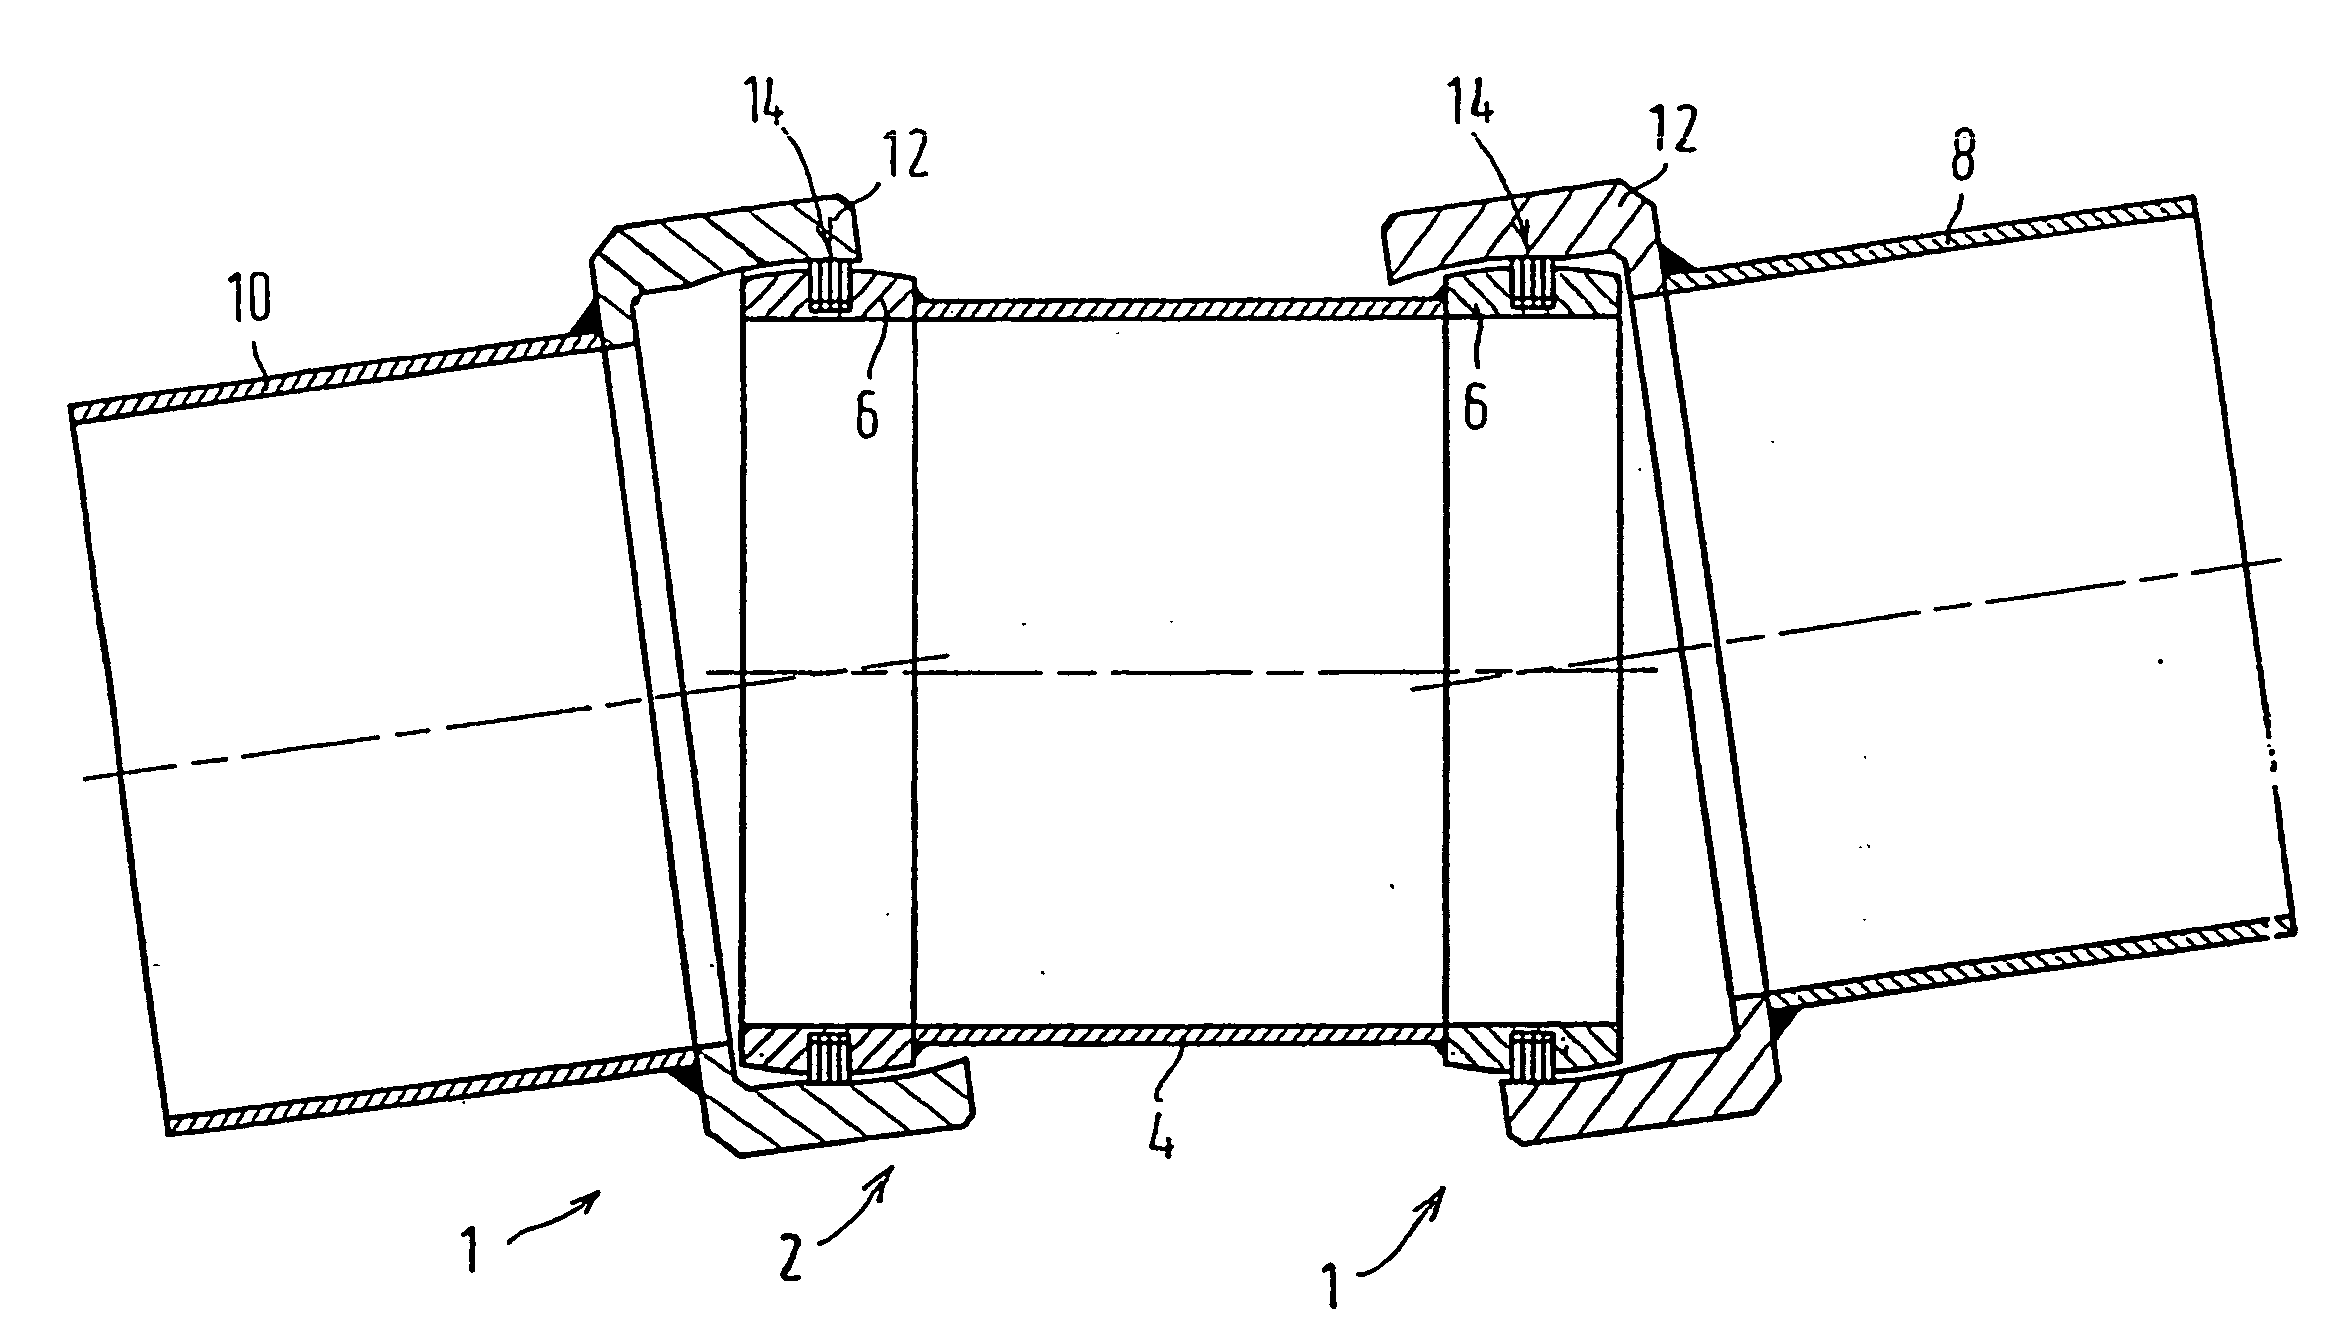 Axial and Radial Play and Angle Compensation of a Tolerating Pipe Connection